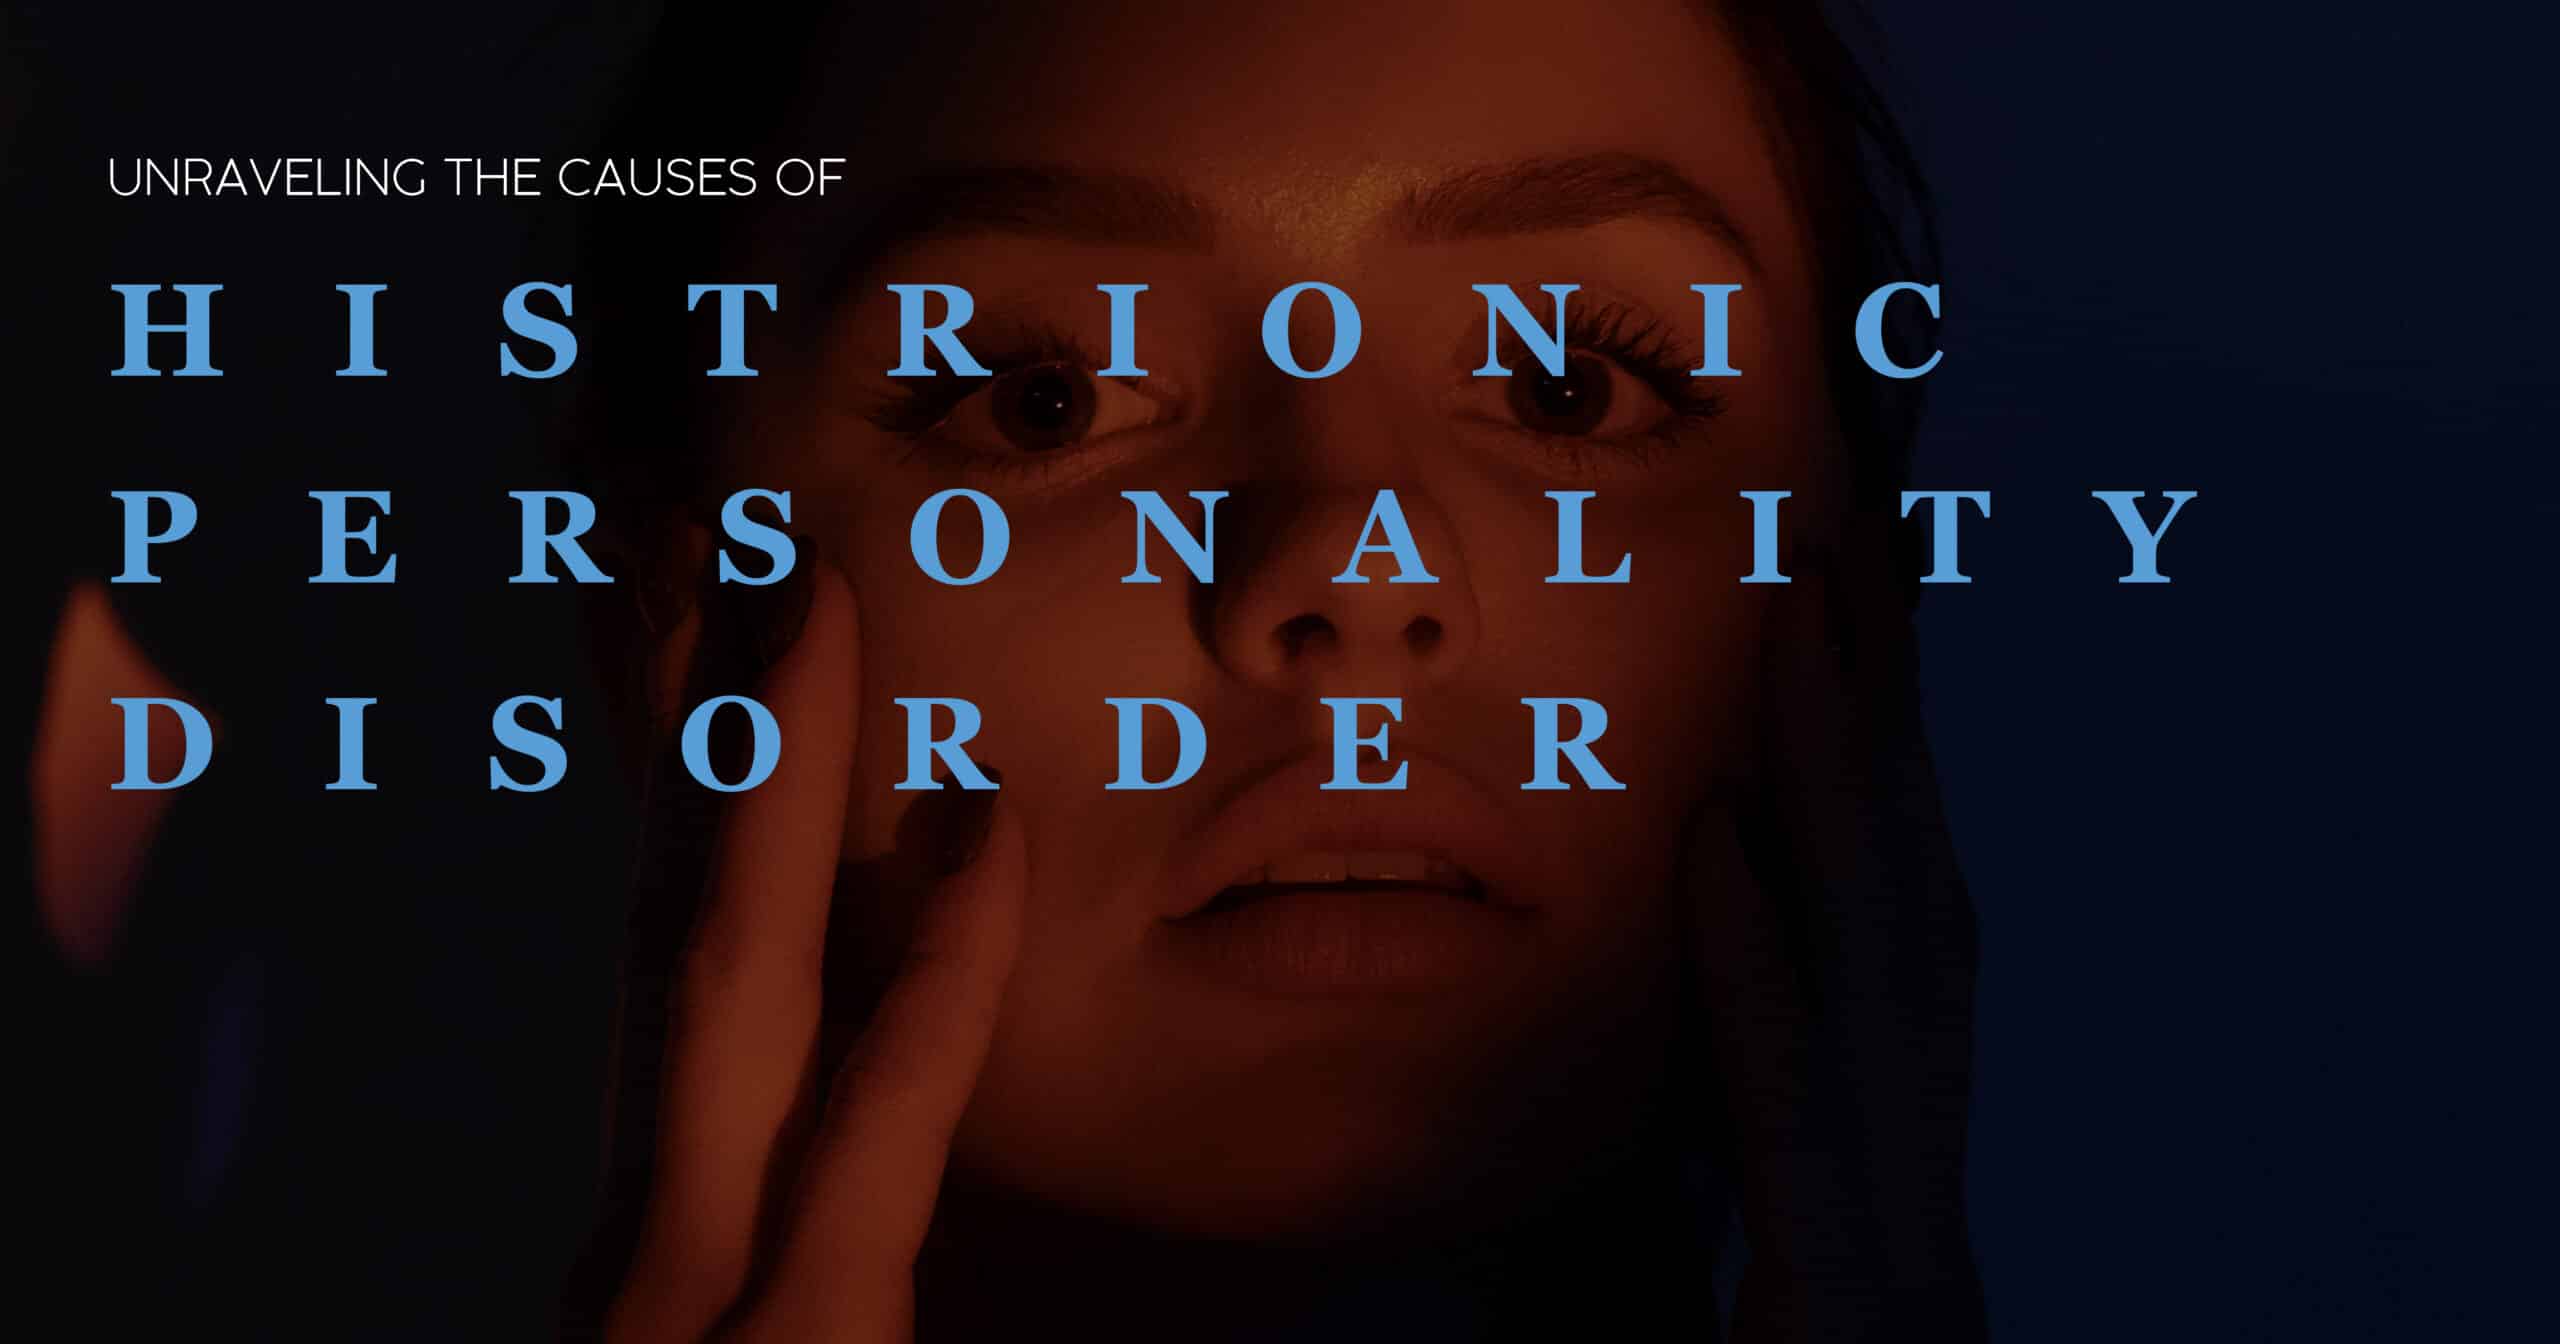 Causes of Histrionic Personality Disorder